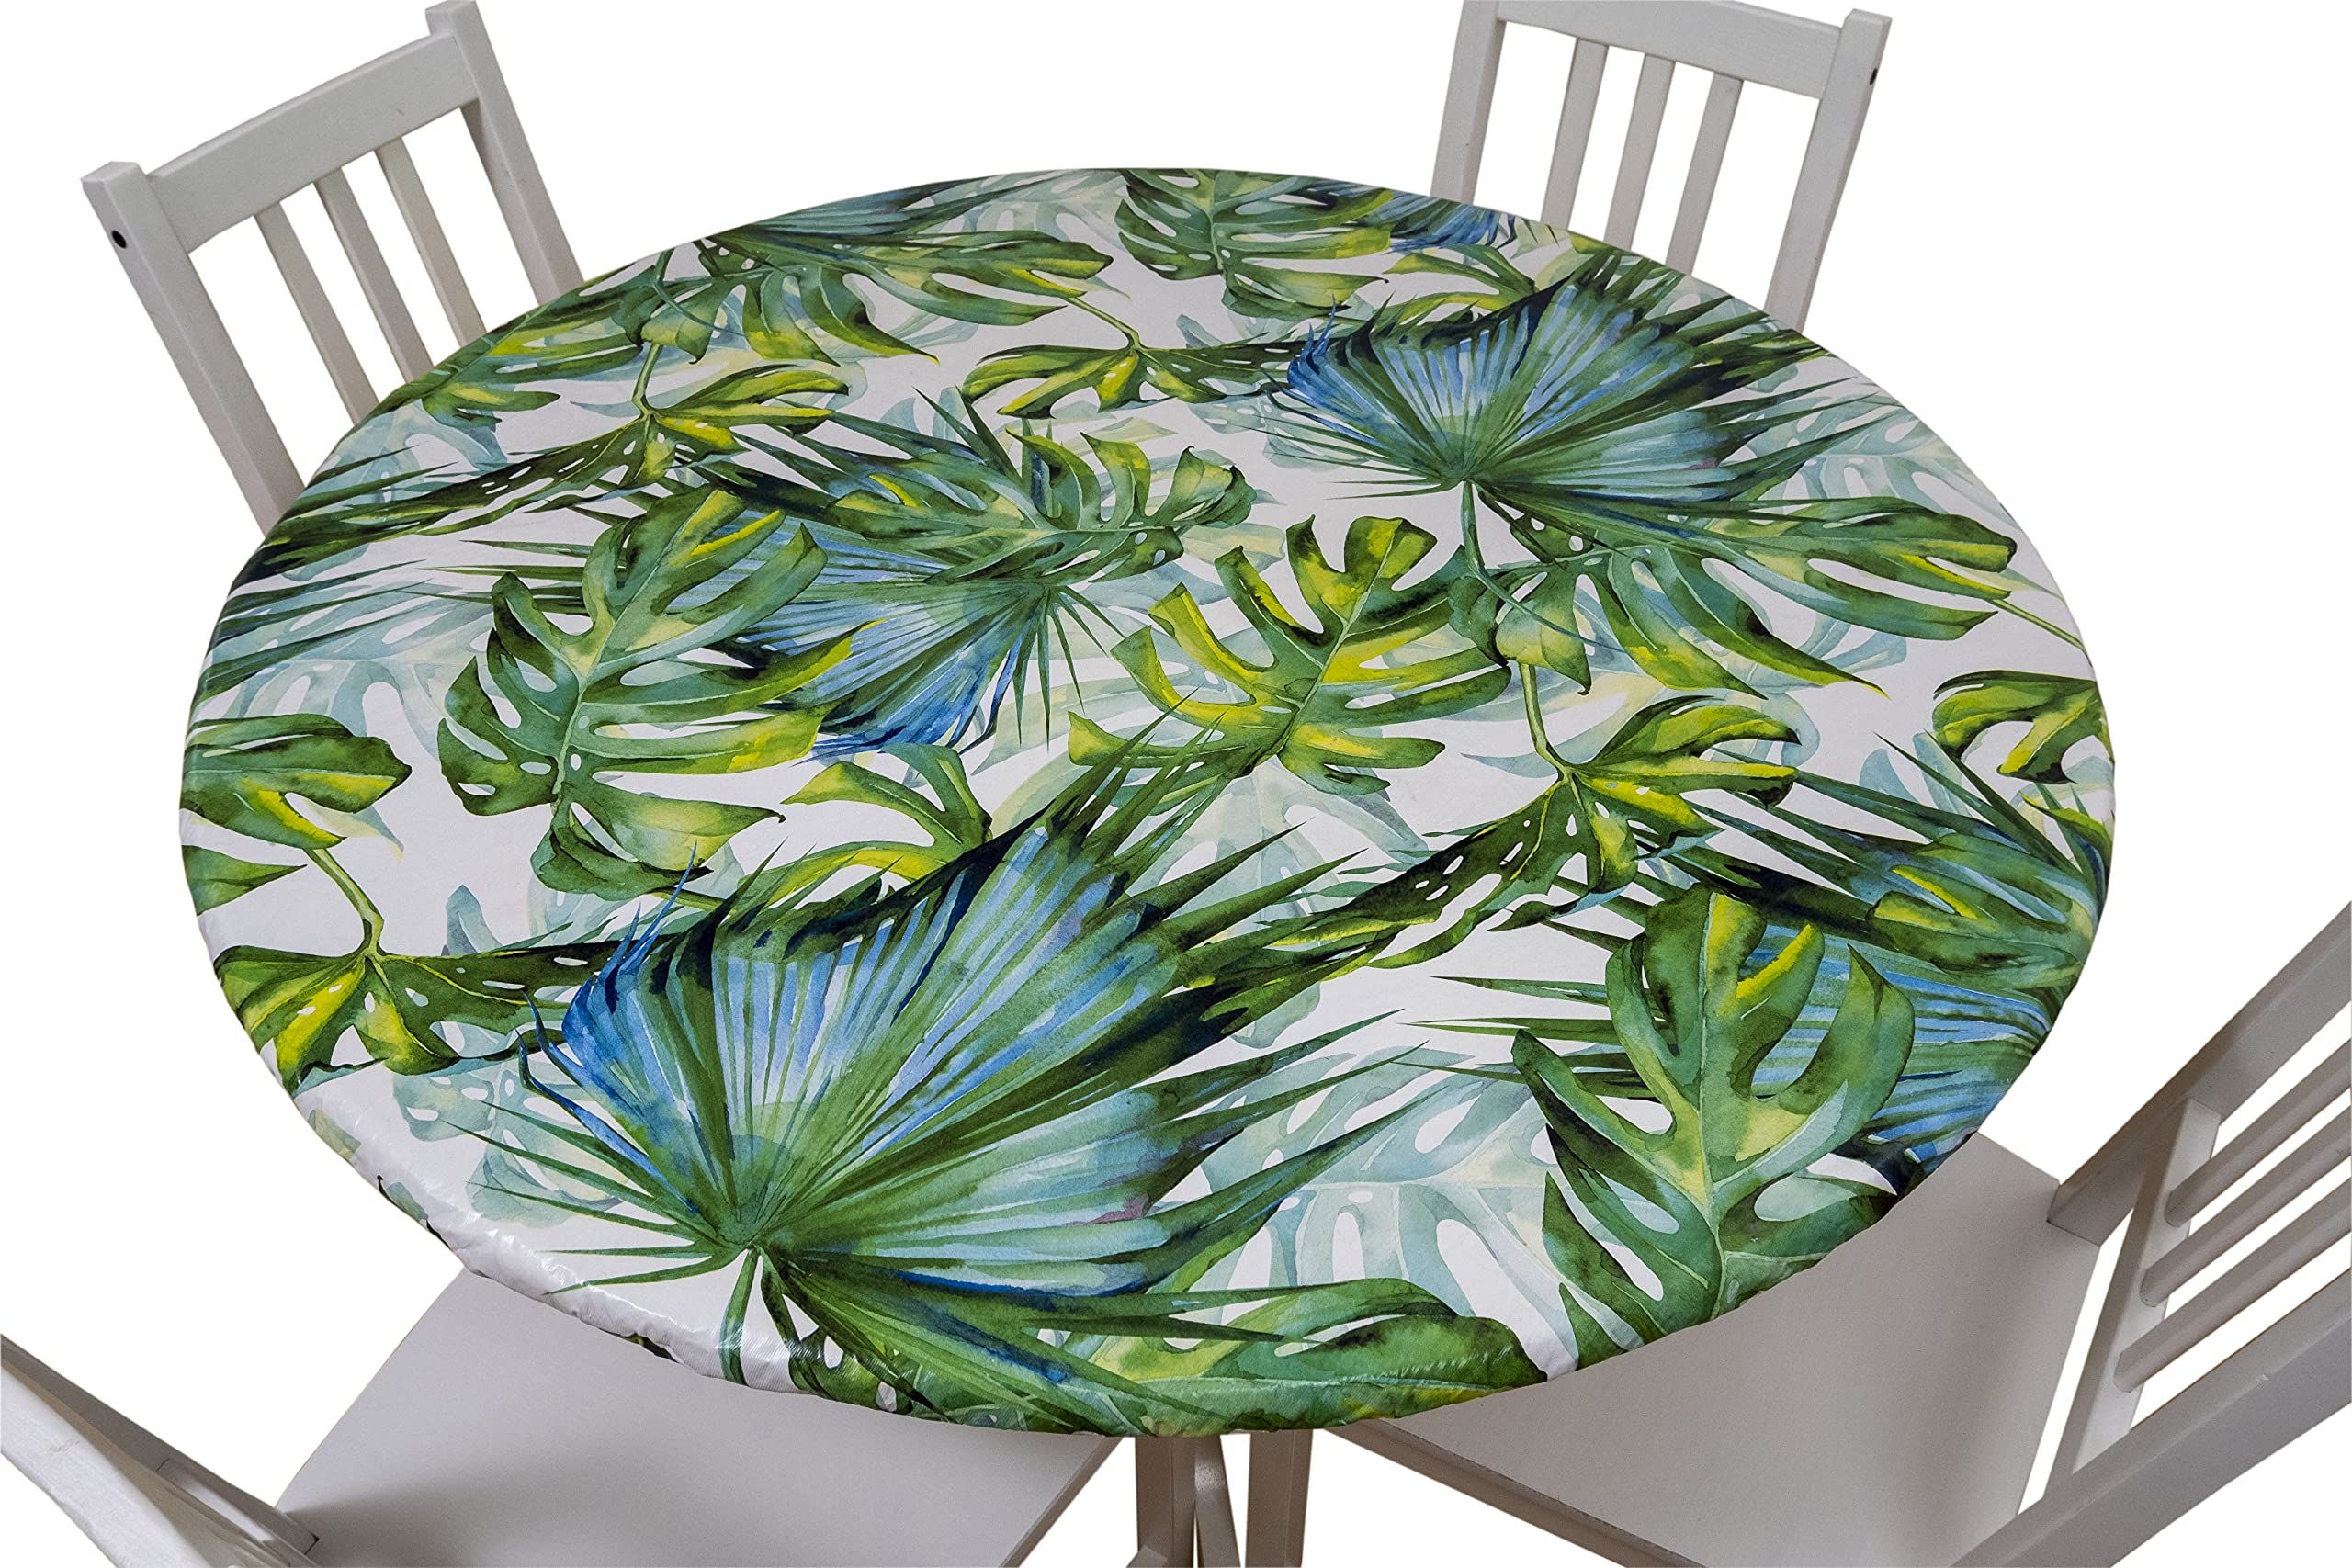 Mayellie Elastic Edged Vinyl Fitted Tablecloth, Flannel Backed & Elastic Edge, Indoor - Outdoor Round Fitted Vinyl Oil & Waterproof Wipeable, Flowers Pattern (40'' to 44'', Monstera)